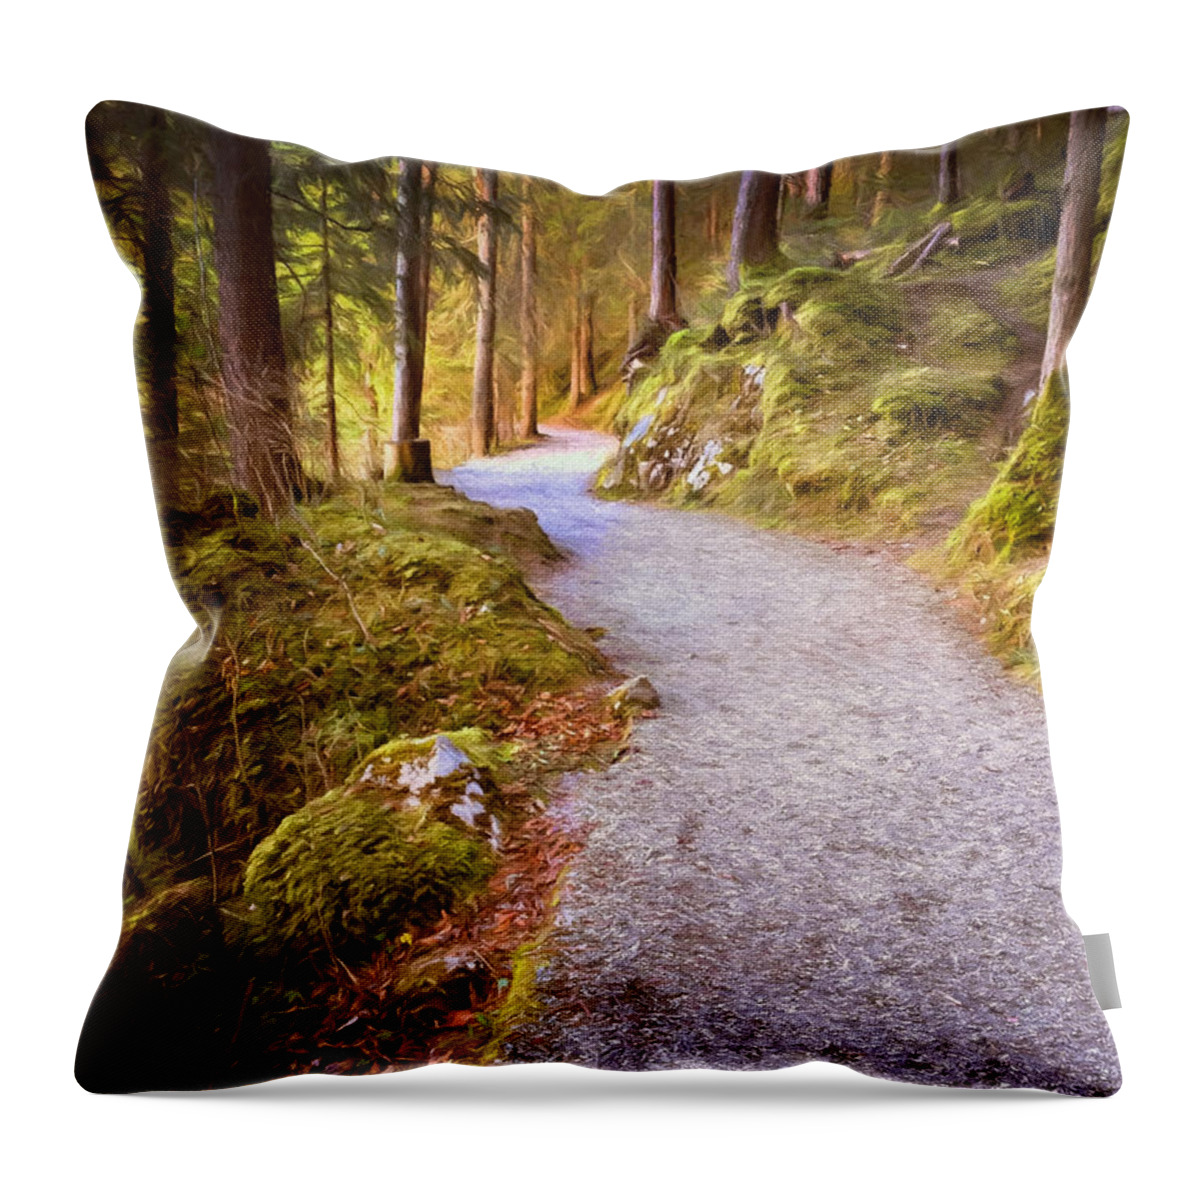 Bavaria Throw Pillow featuring the photograph The Way Home by Shirley Radabaugh